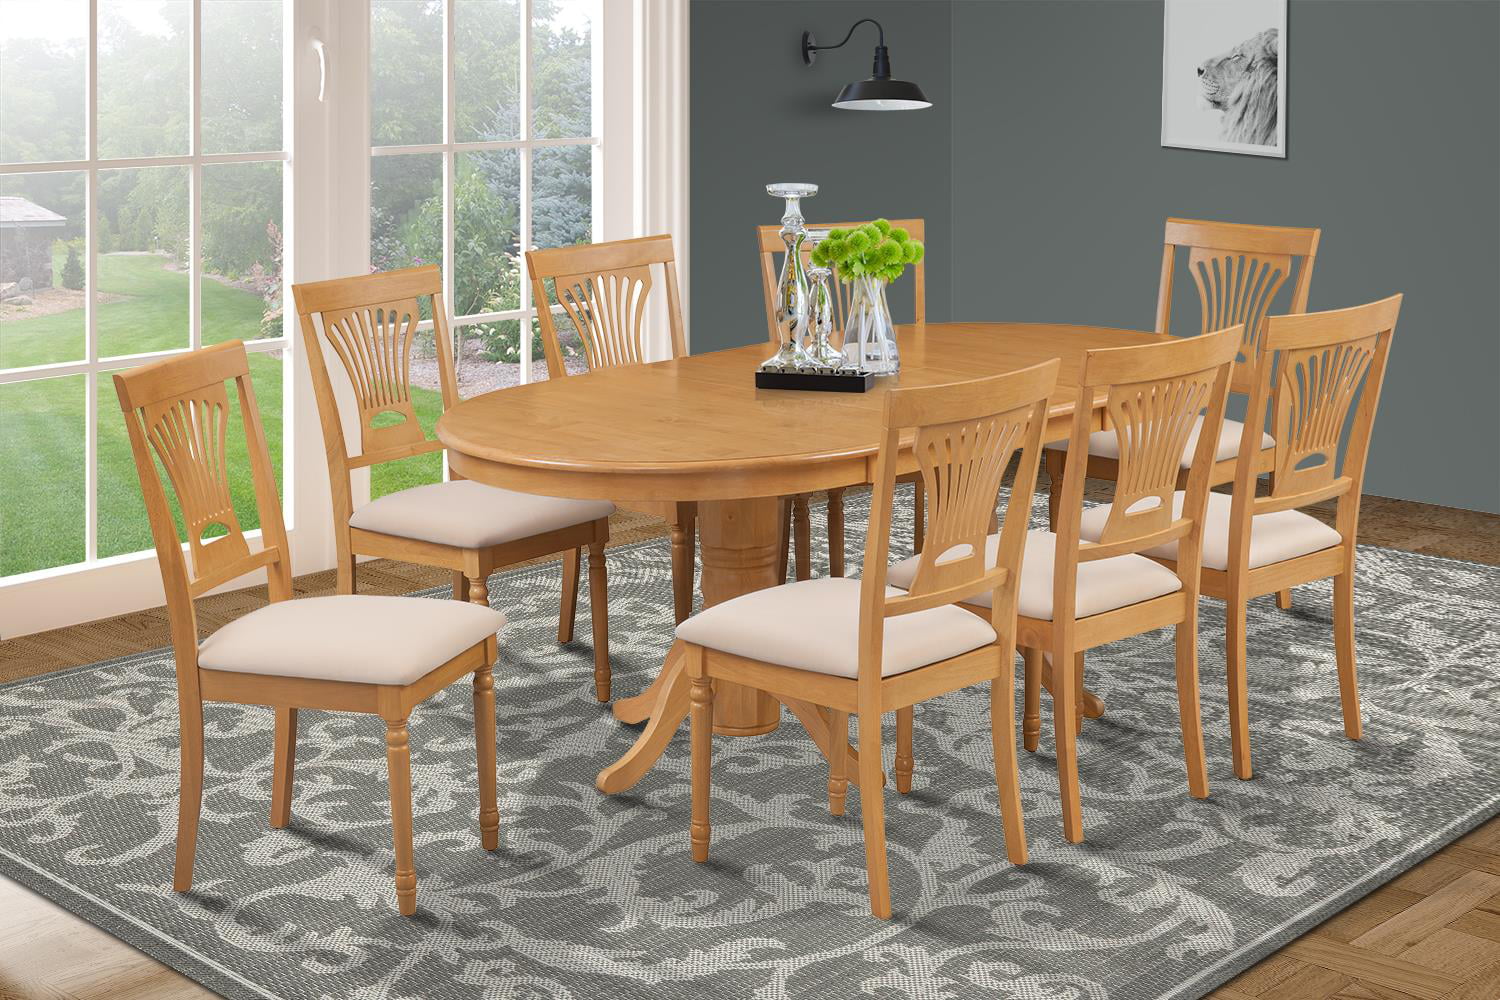 dining room tables and chairs for 8 Dining room table formal chairs sets chair affordhomefurniture rooms elissa furniture tables sizing pertaining 1200 upholstered